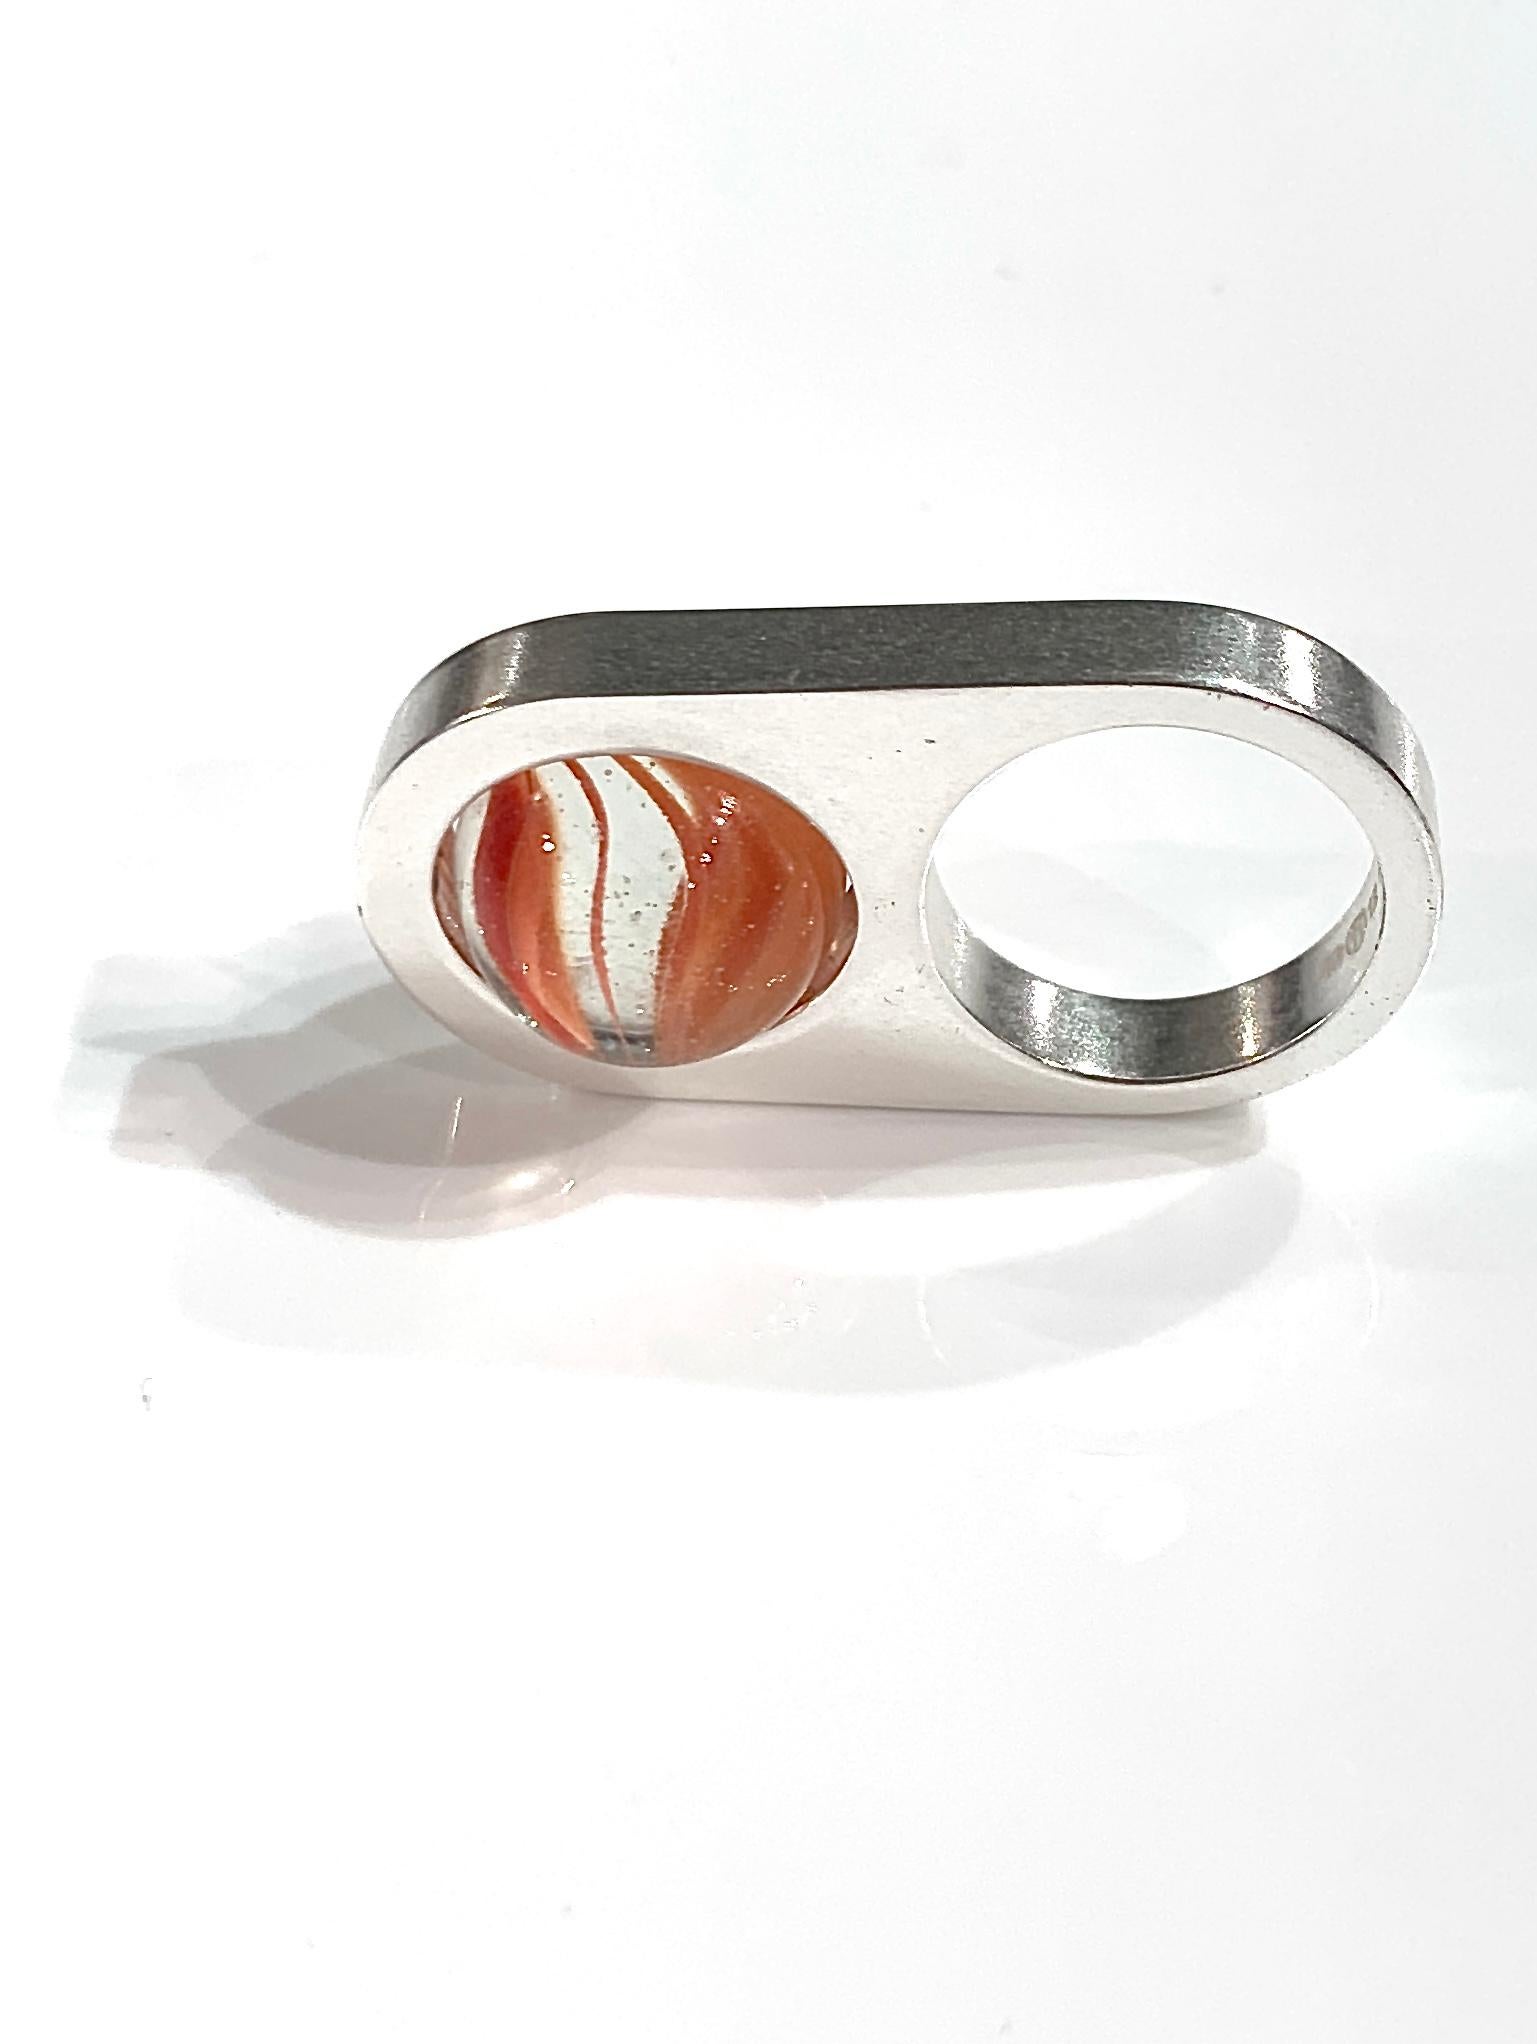 Maison Martin Margiela ring  of the summer 2016 season with a colored glass marble embedded inside a brass structure. 
The marble can spin on itself. Inside the ring is the brand's numerical mark, with the circled 11 indicating the unisex